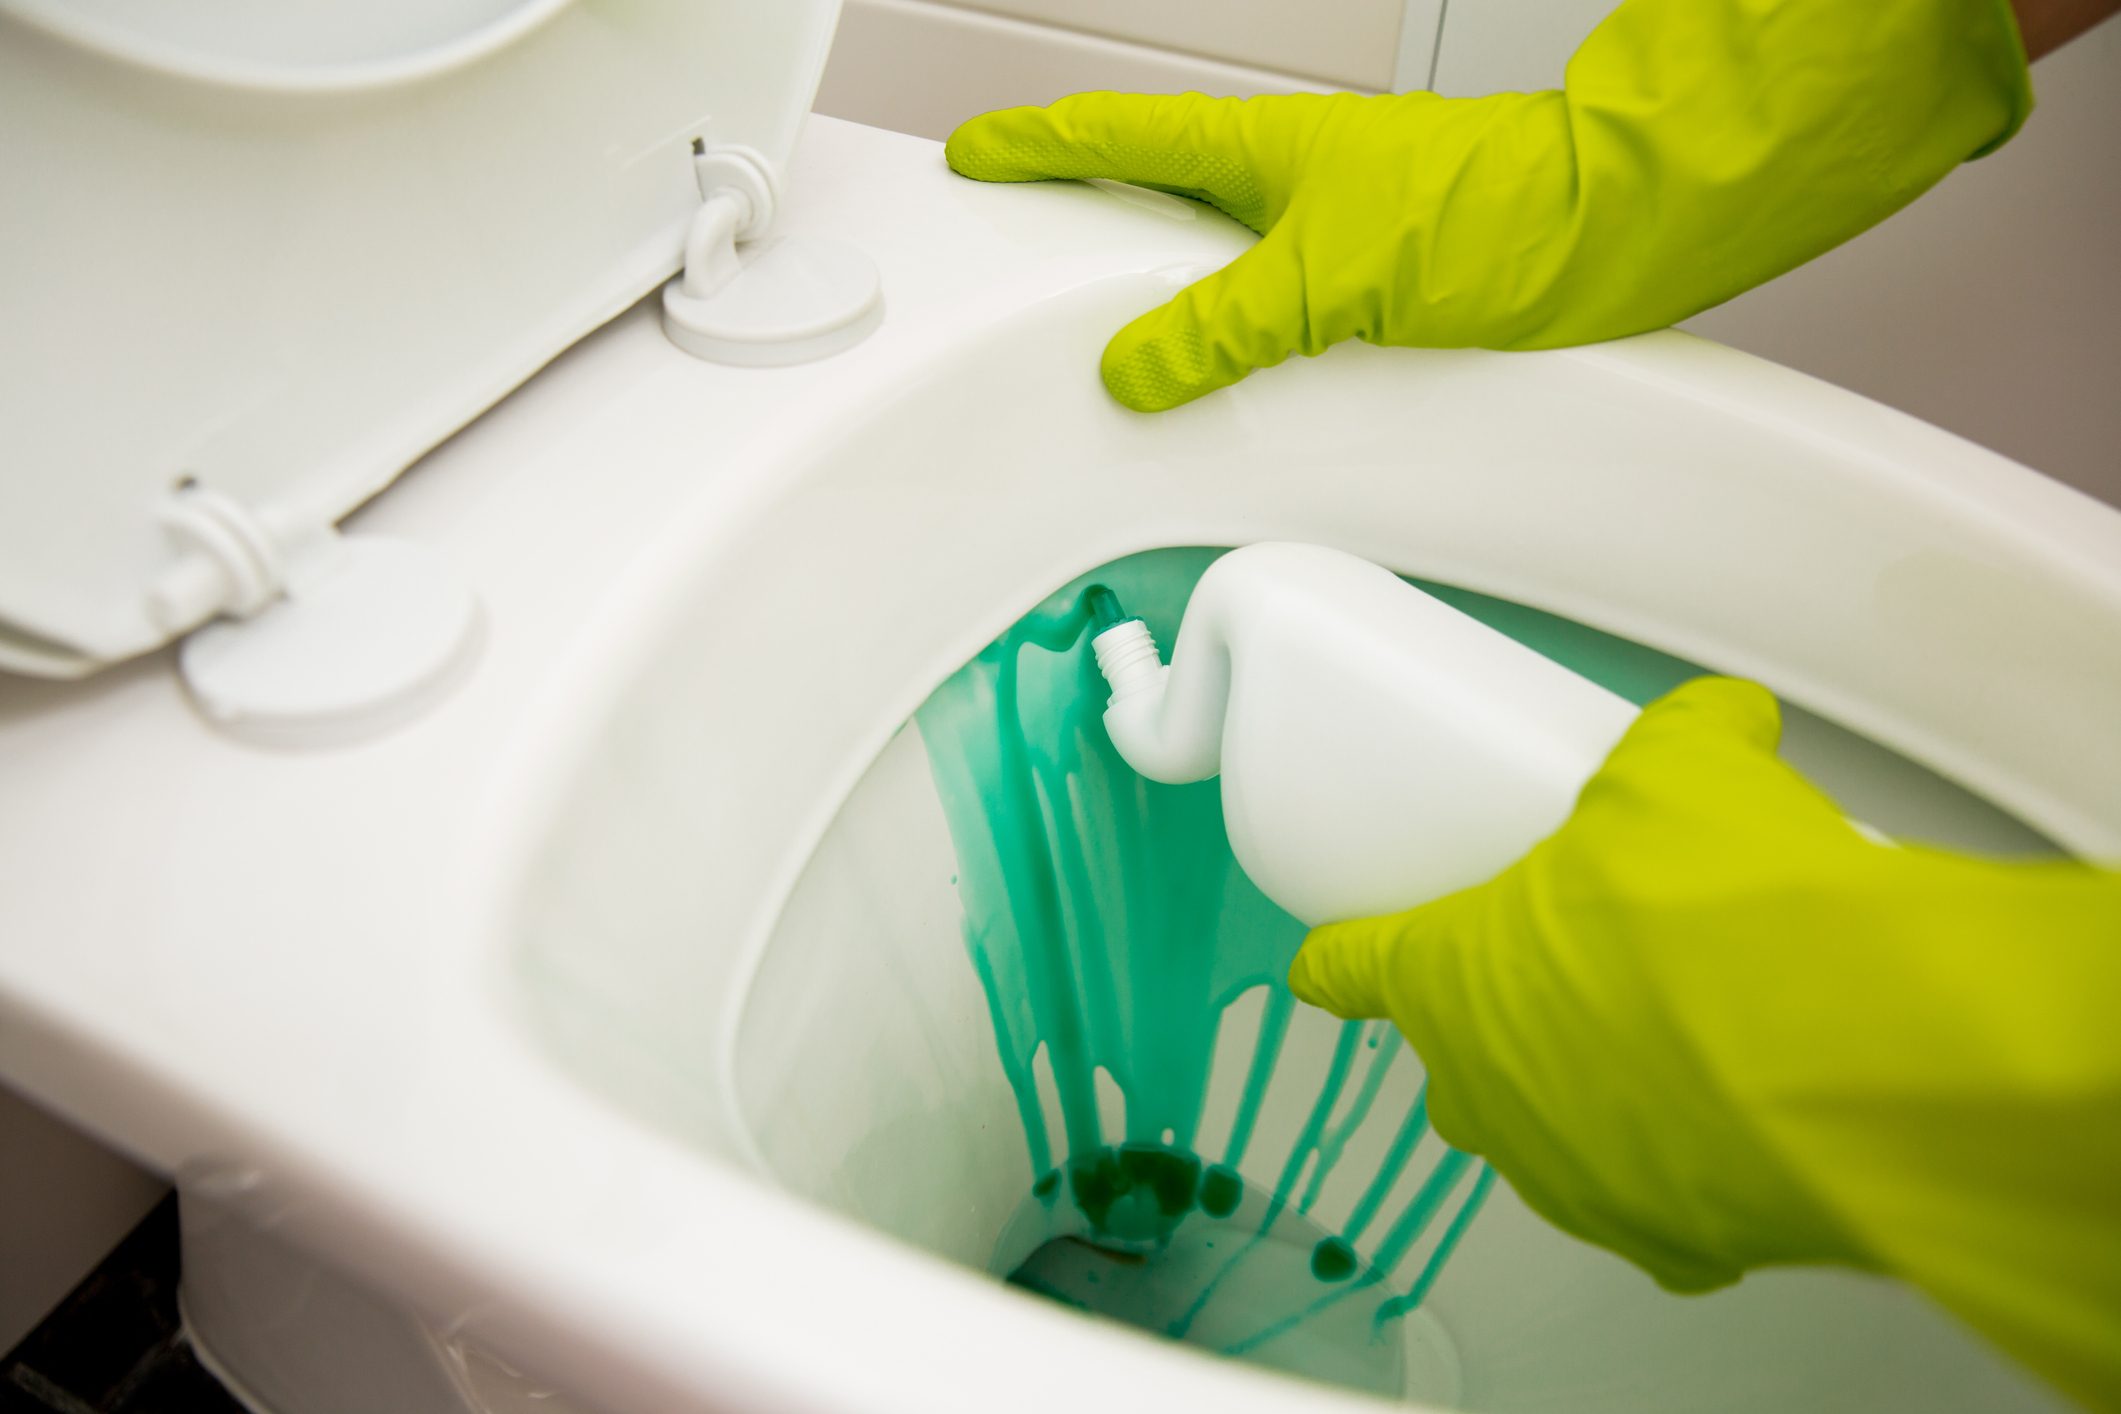 hands in rubber protective gloves adding toilet bowl cleaner to toilet in apartment bathroom